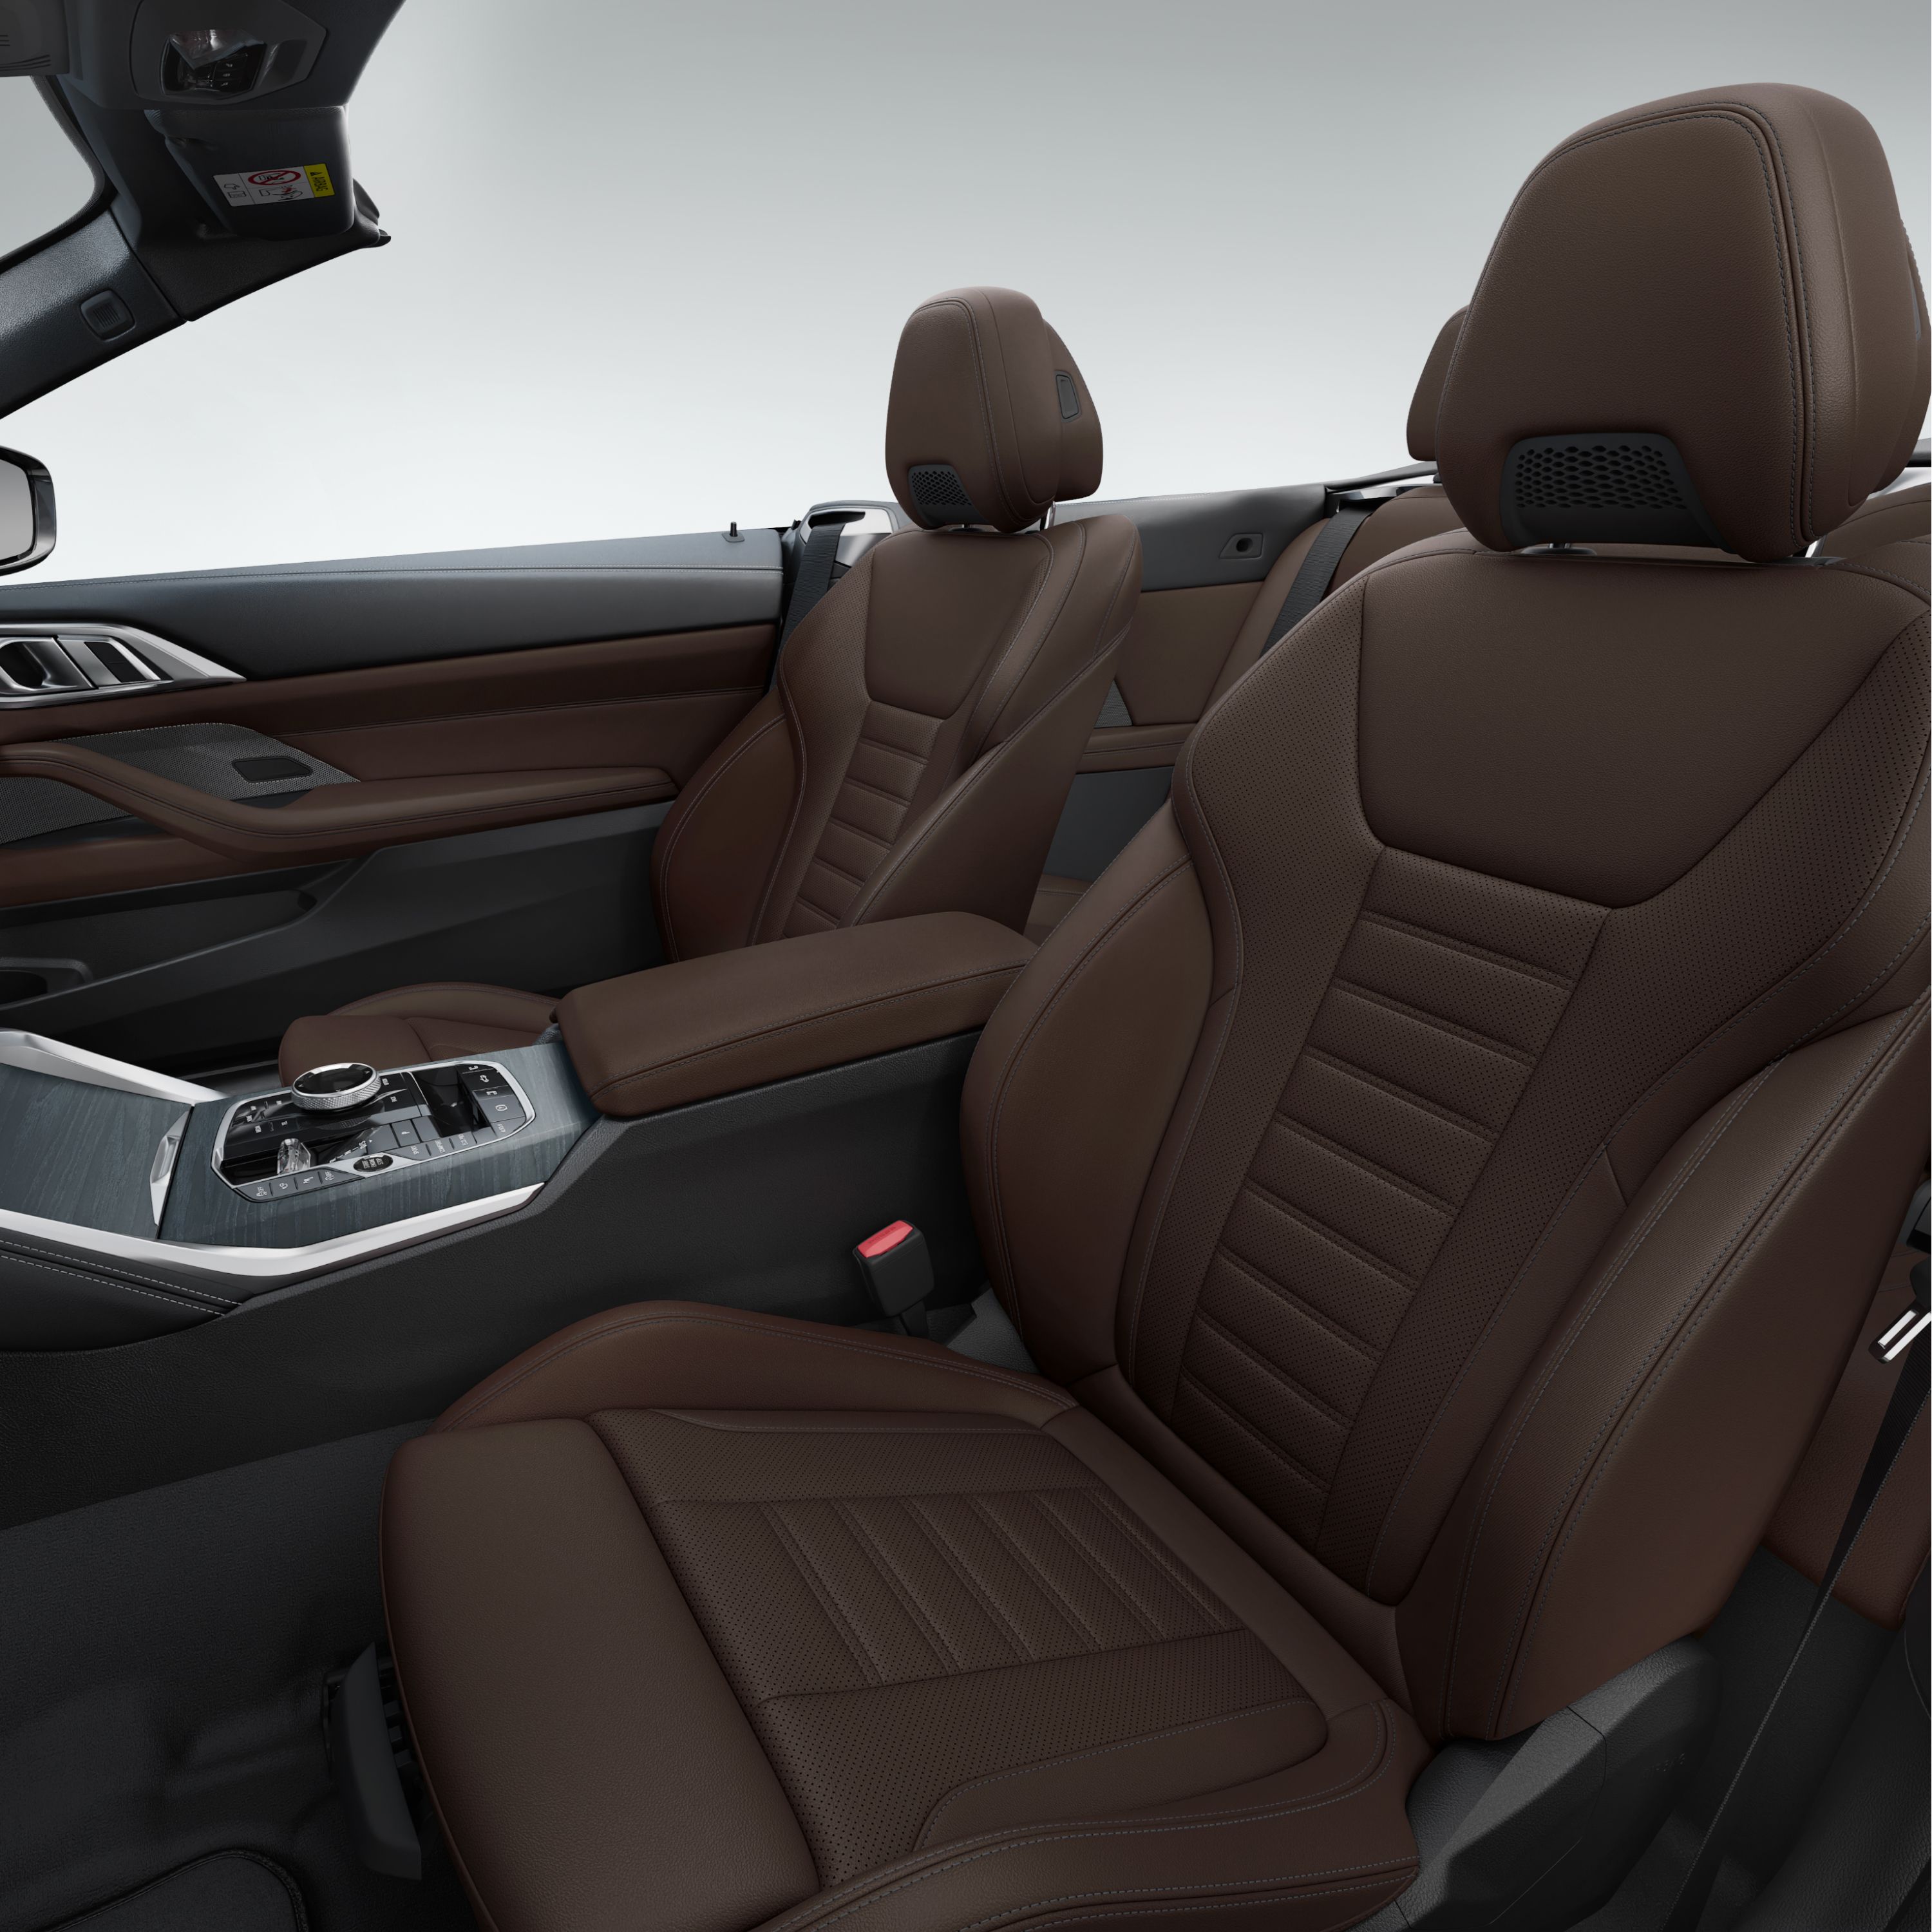 New Vernasca Leather upholstery on the BMW 4 Series Convertible